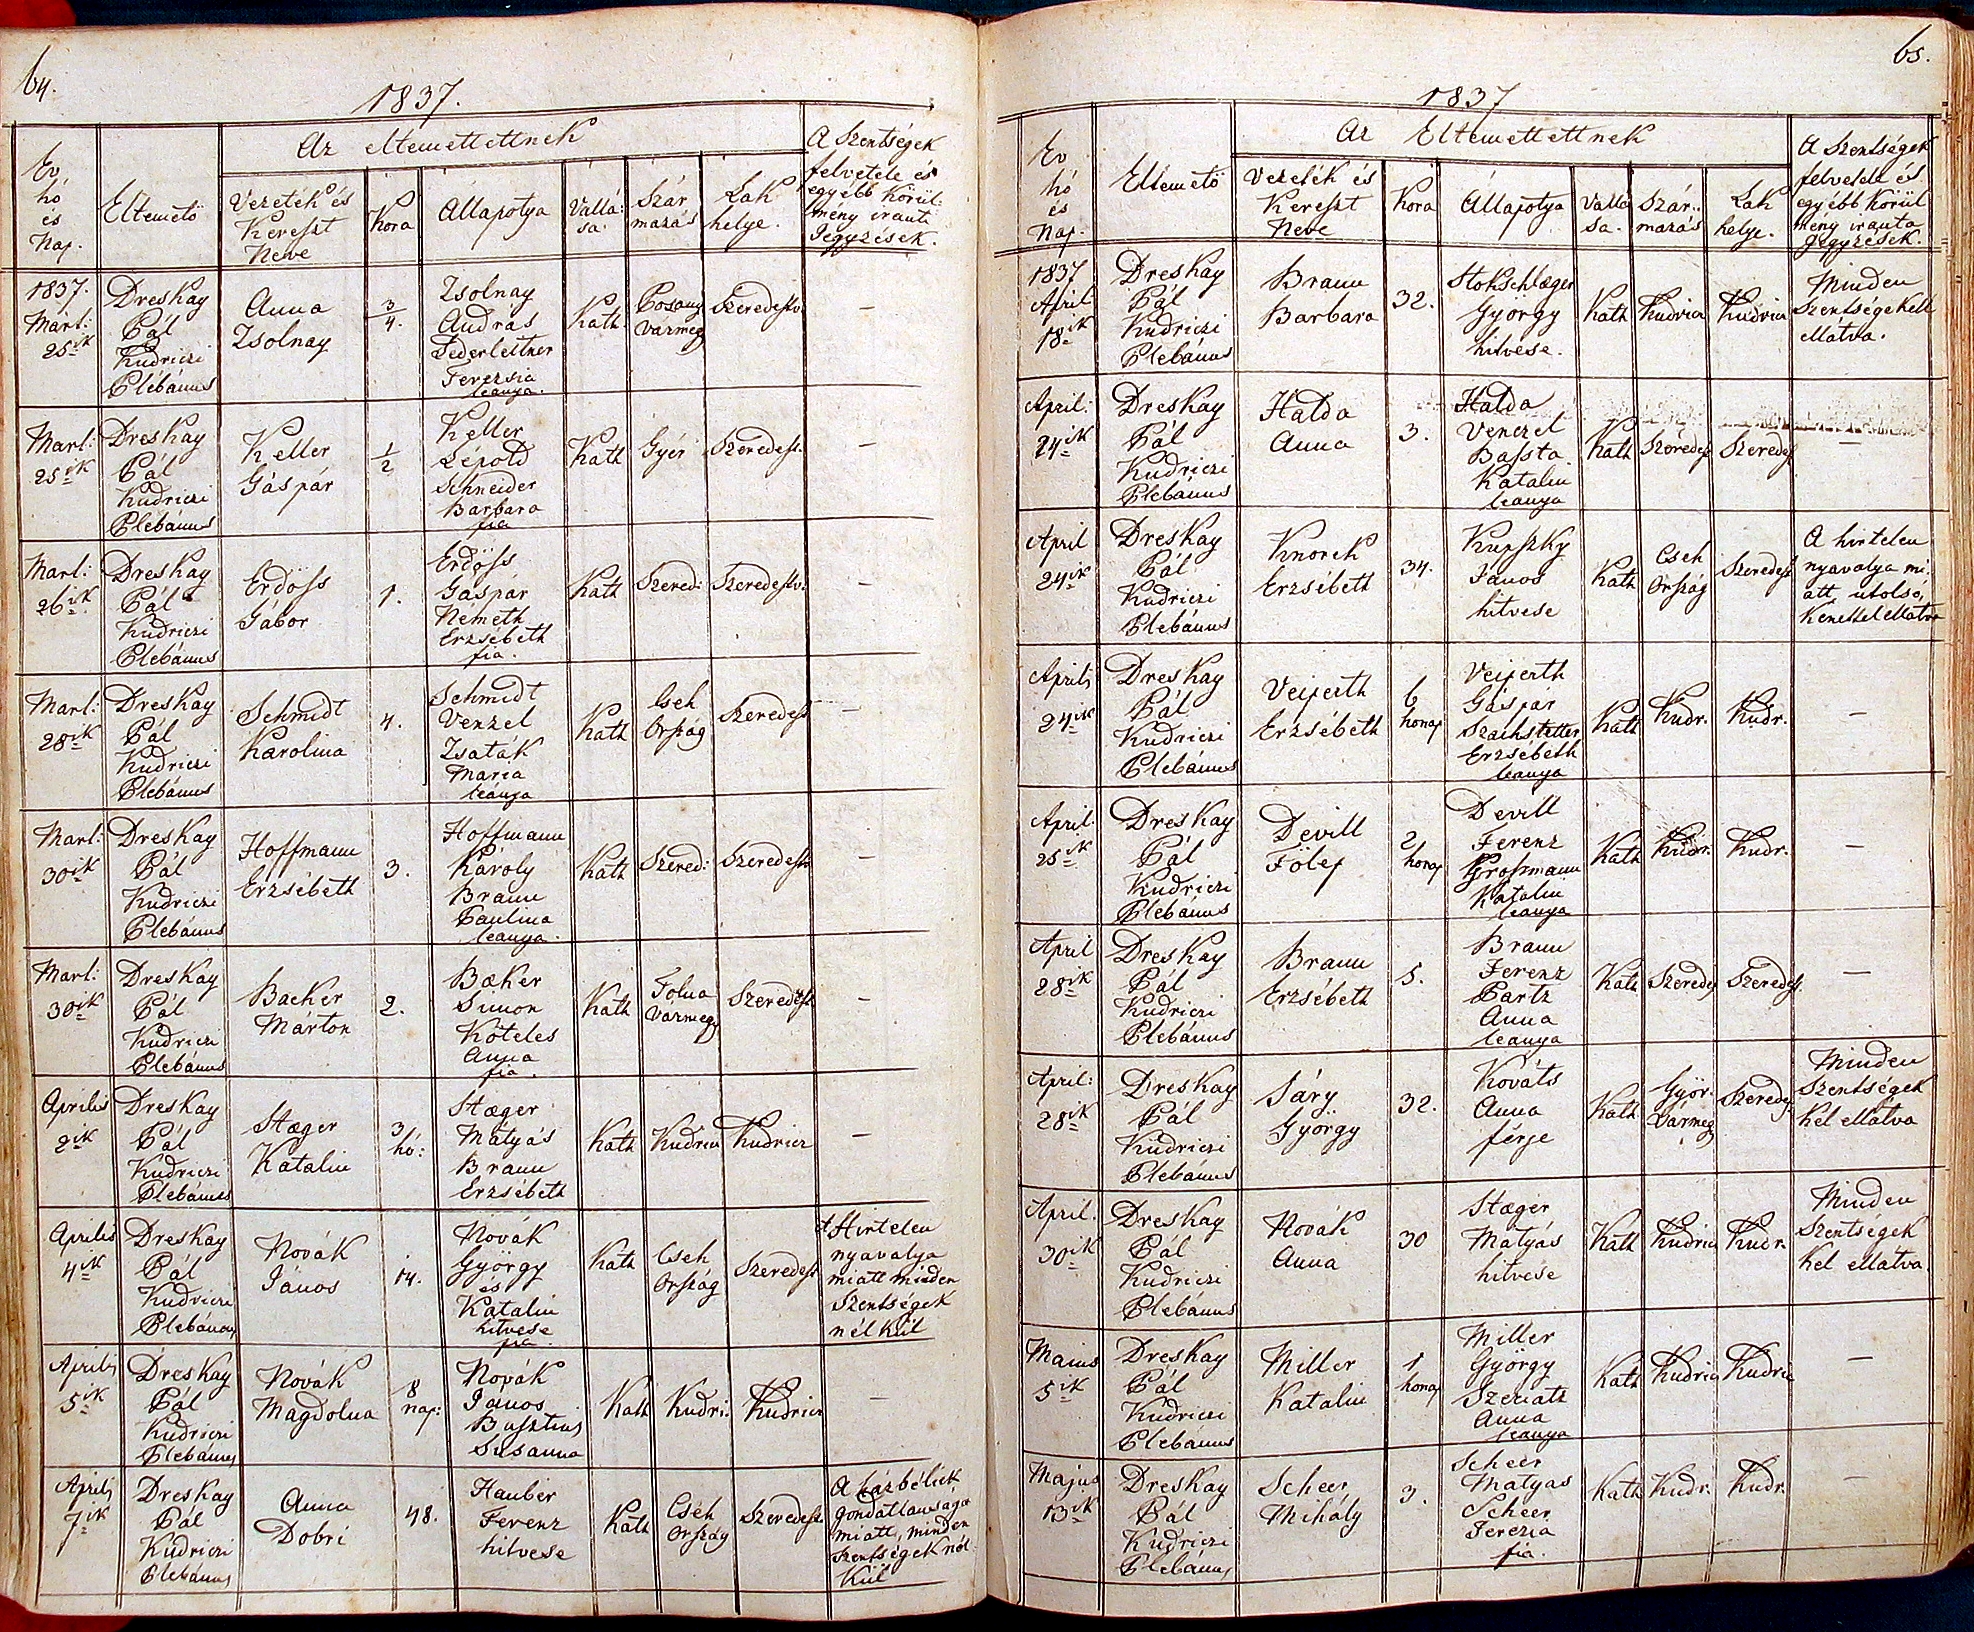 images/church_records/DEATHS/1775-1828D/064 i 065